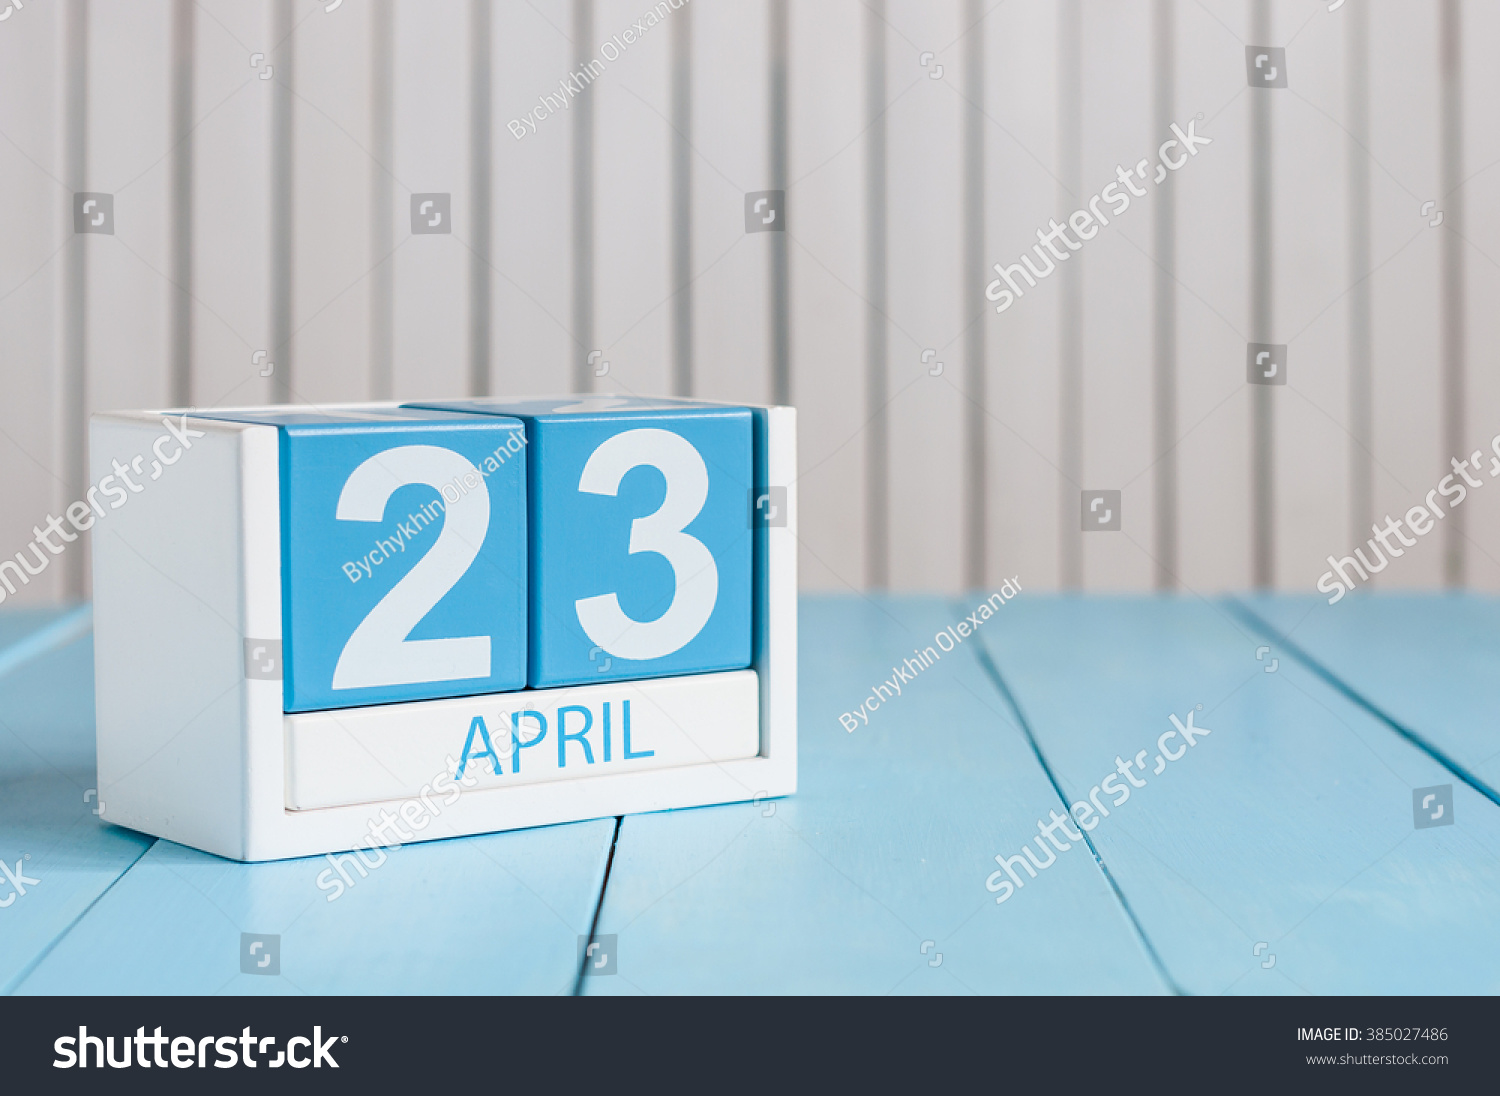 April 23rd. World Book Day. Image of april 23 wooden color calendar on white background.  Spring day, empty space for text #385027486